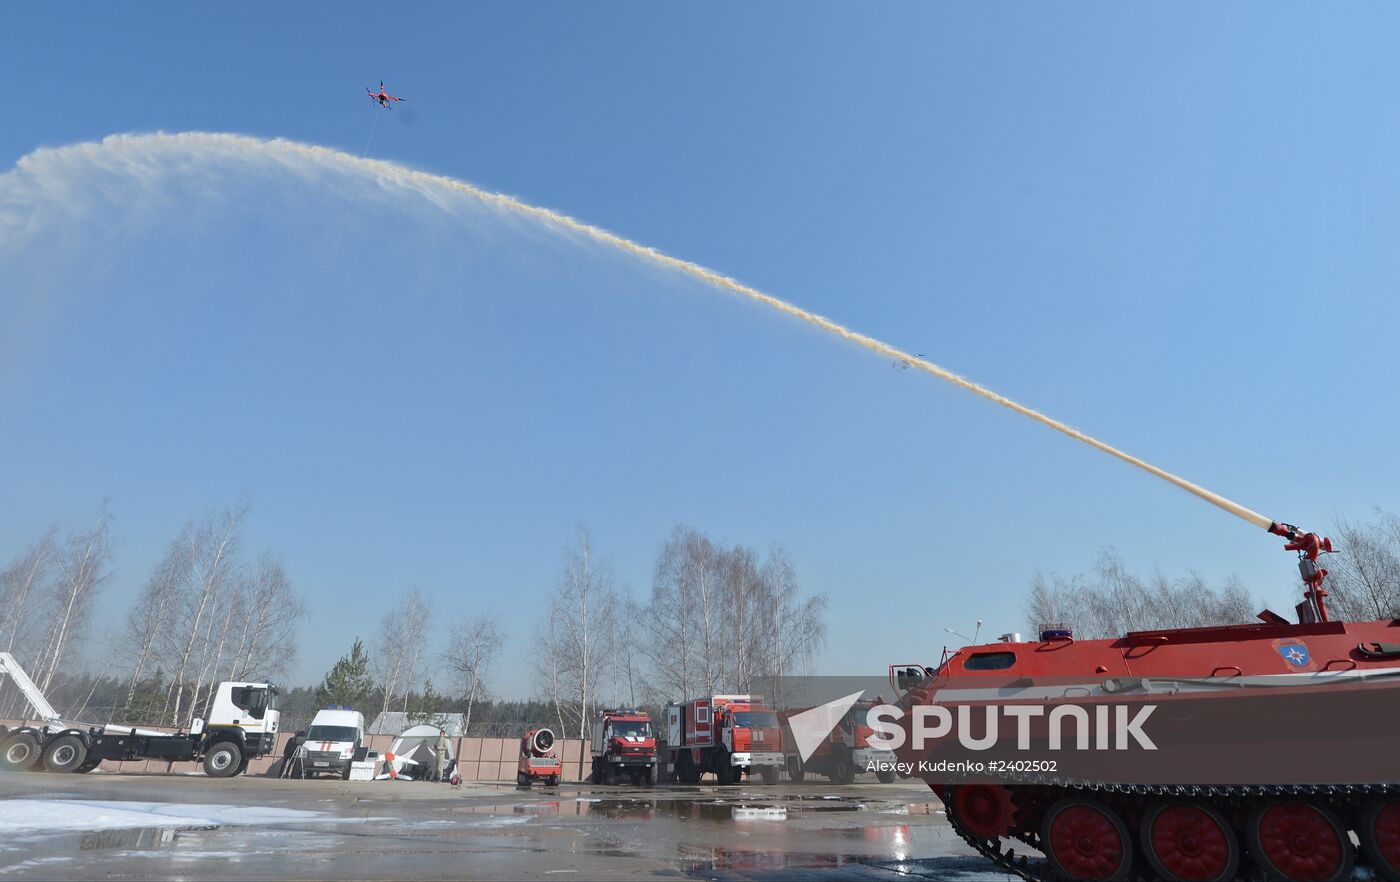 Russian Emergencies Ministry displays modern firefighting anf rescue equipment